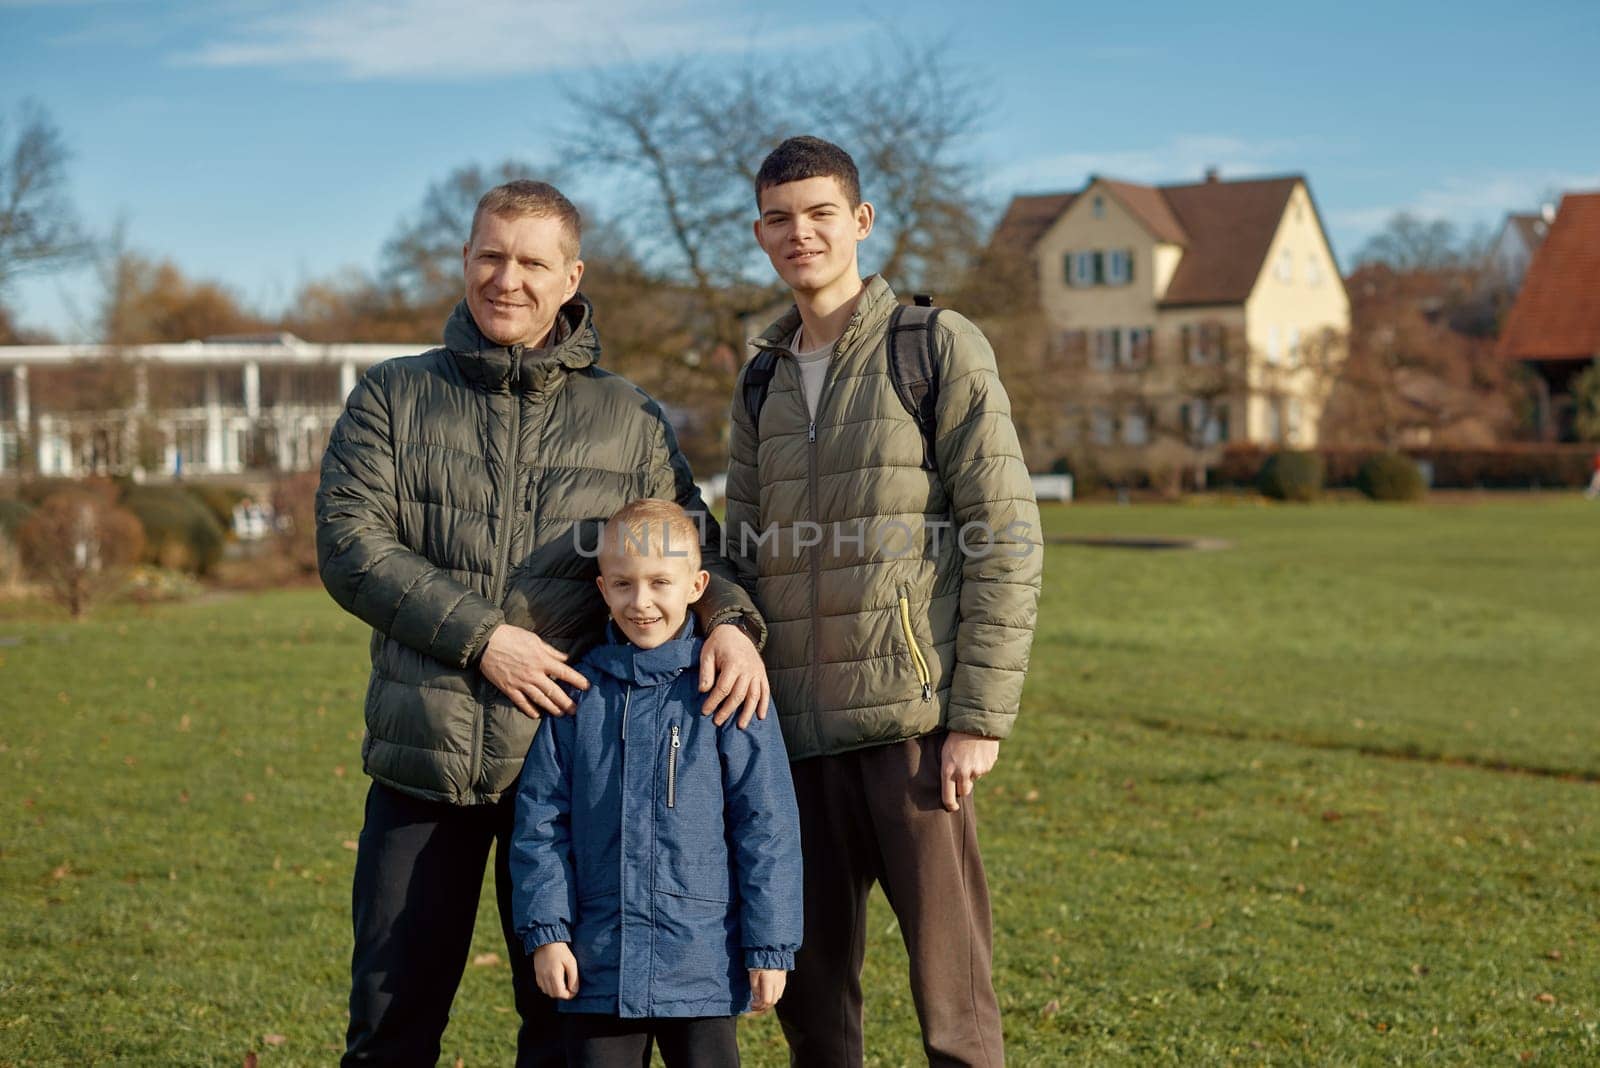 Family Harmony: Father, 40 Years Old, and Two Sons - Beautiful 8-Year-Old Boy and 17-Year-Old Young Man, Standing on the Lawn in a Park with Vintage Half-Timbered Buildings, Bietigheim-Bissingen, Germany, Autumn by Andrii_Ko